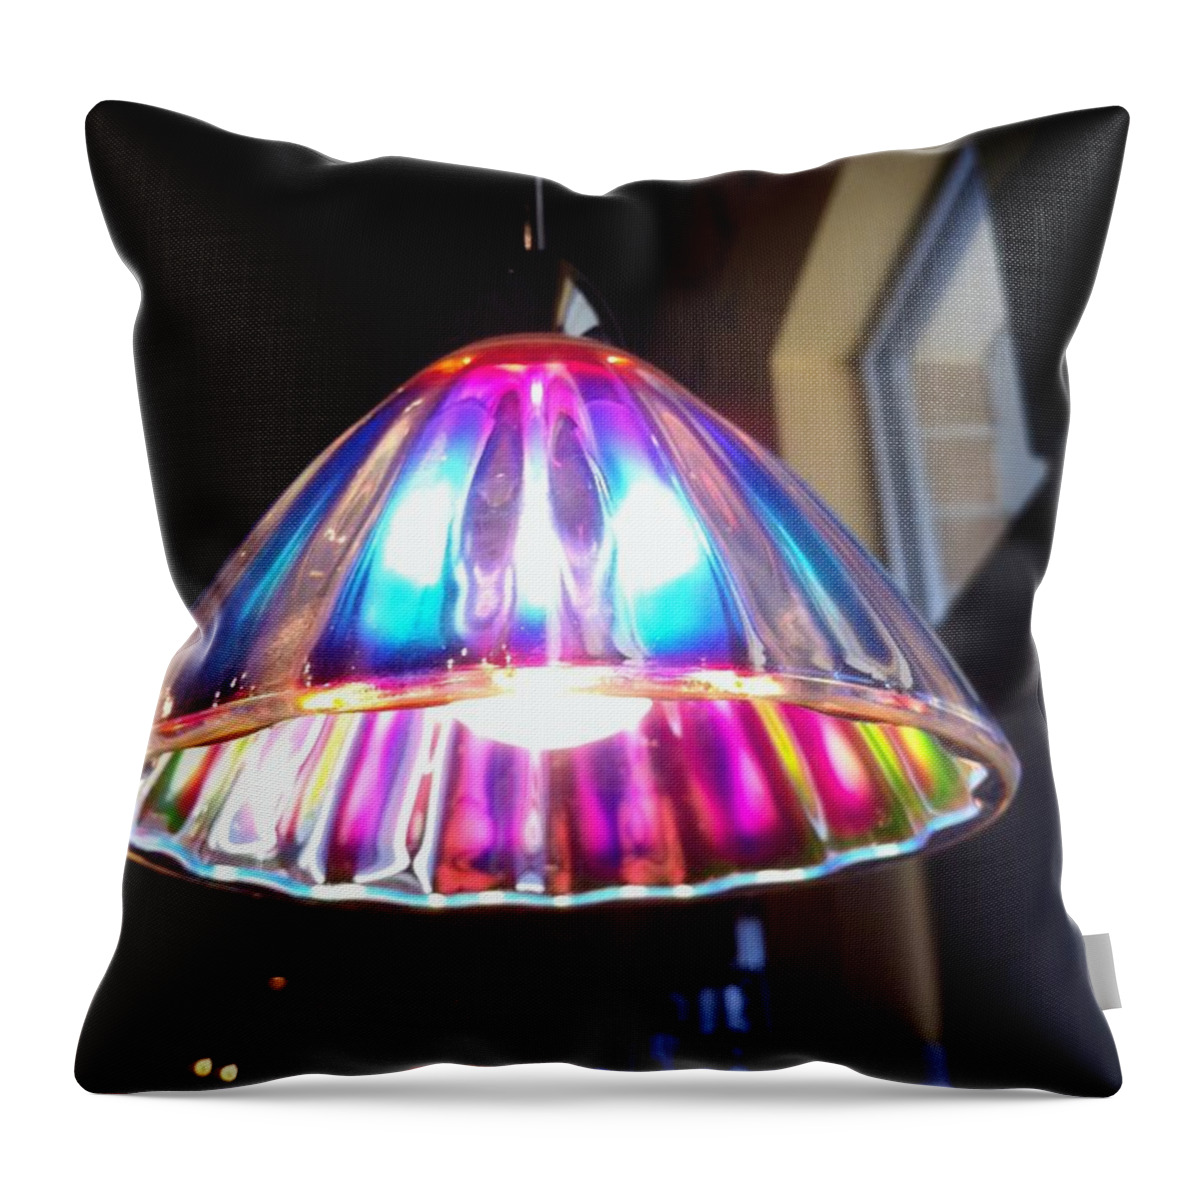 Colorful Light Shade Throw Pillow featuring the photograph Colorful Light by Susan Garren